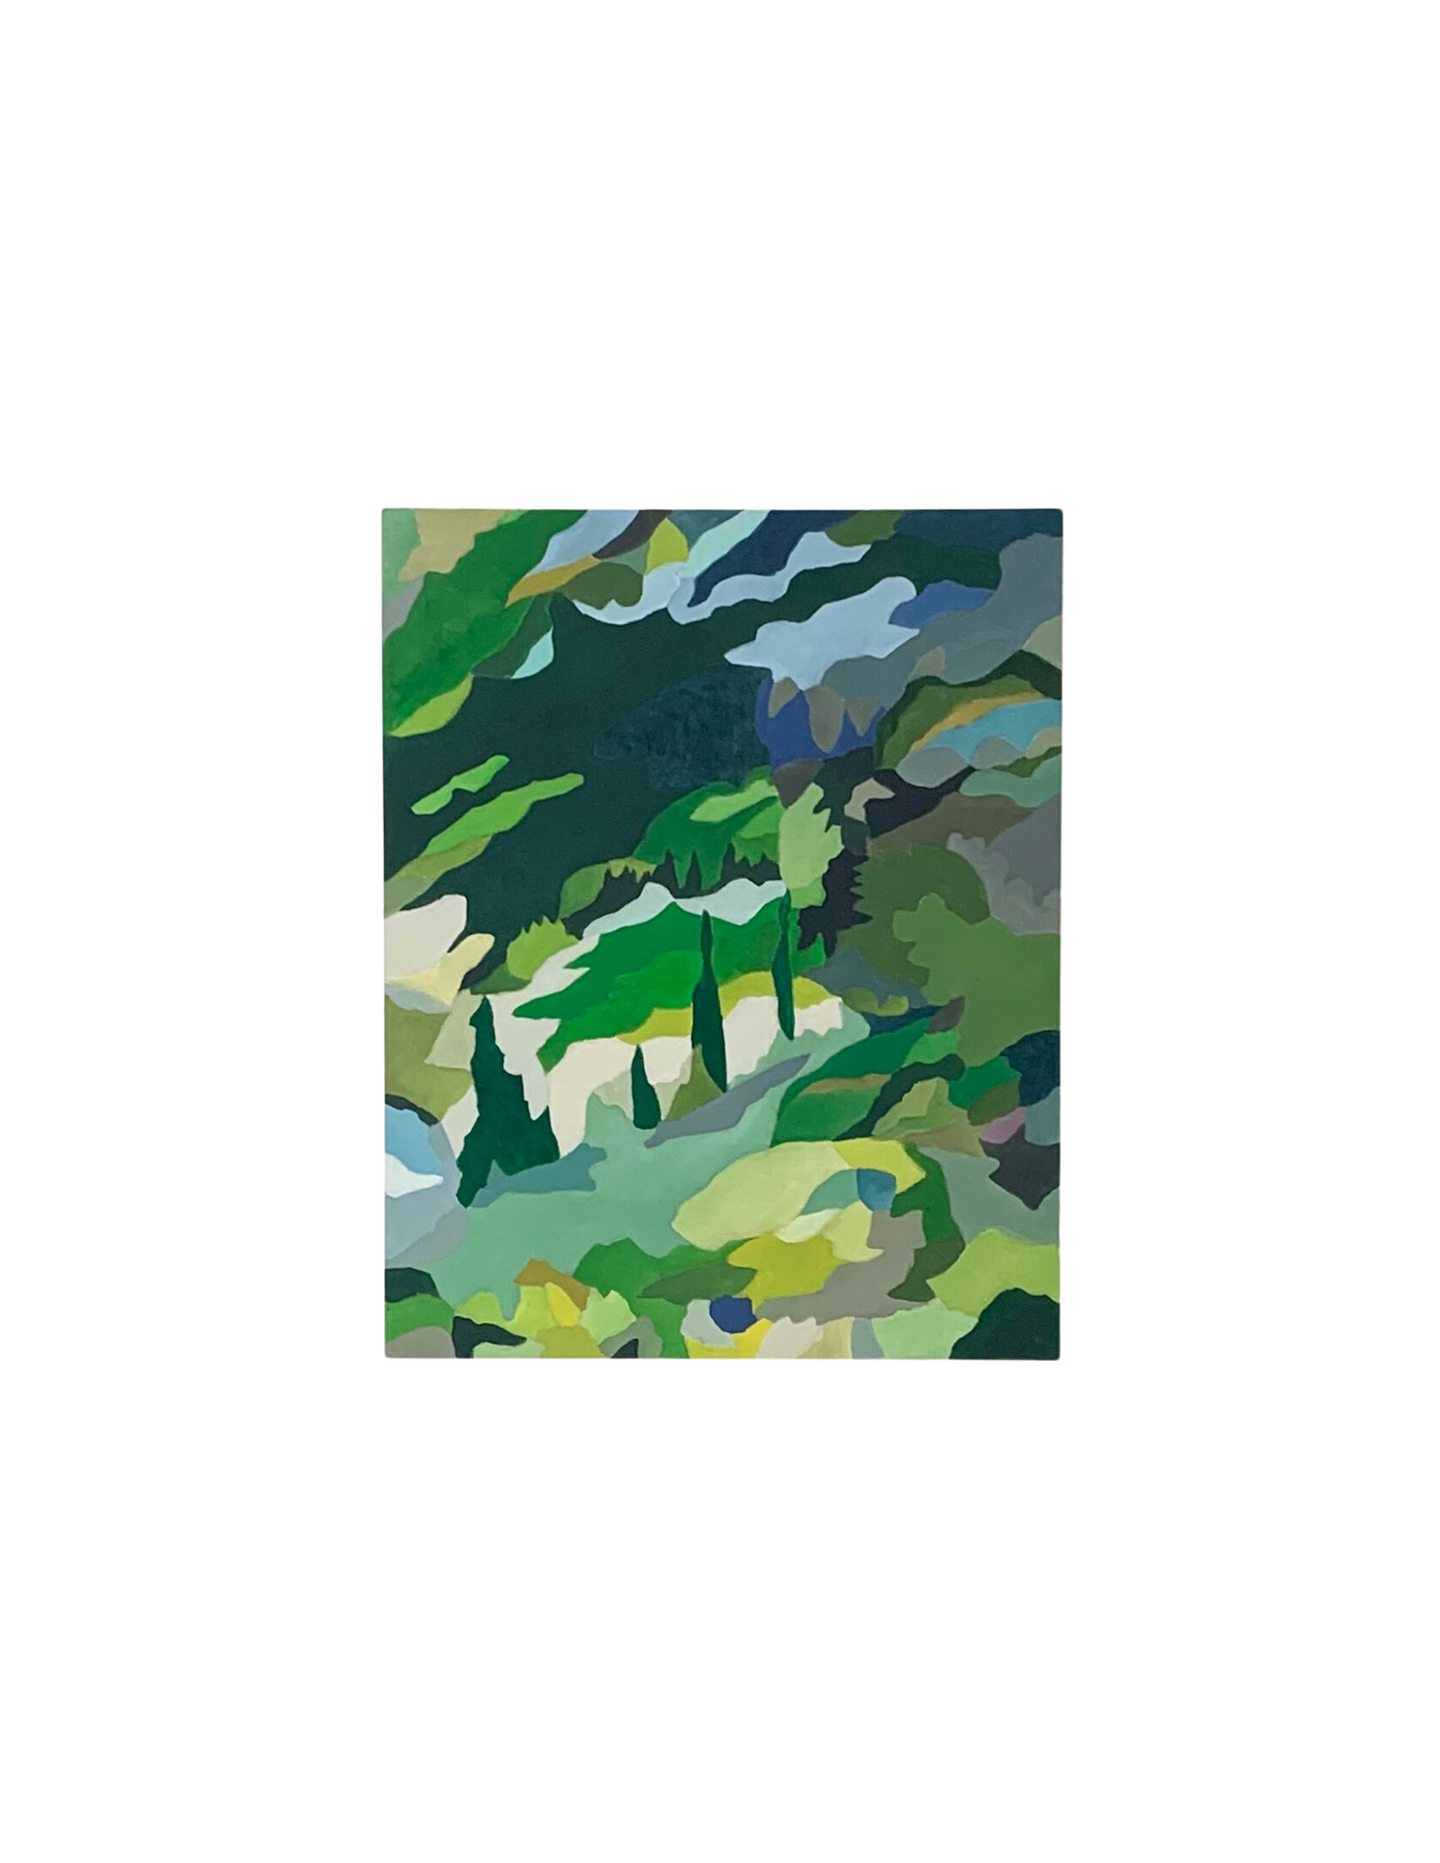 MOUNTAIN SHAPES 2